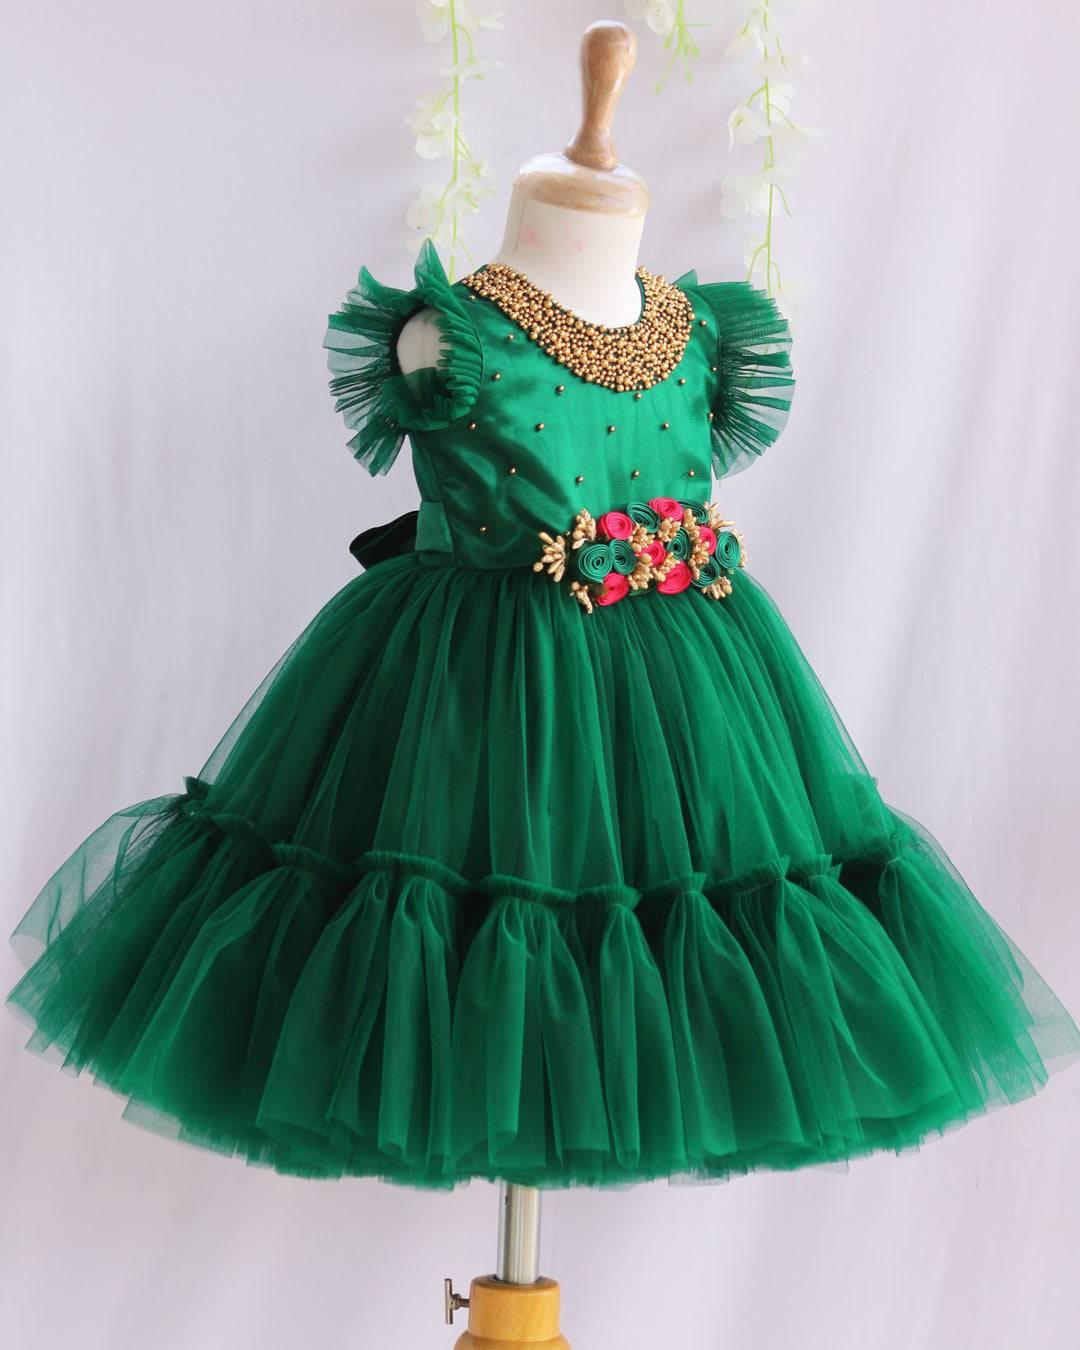 Bottle Green Shade Handwork Flower Frock
Material:  Bottle Green shade mono nylon net fabric with premium glossy satin as lining. Inner portion is covered with premium ultra satin and white cotton lining. 